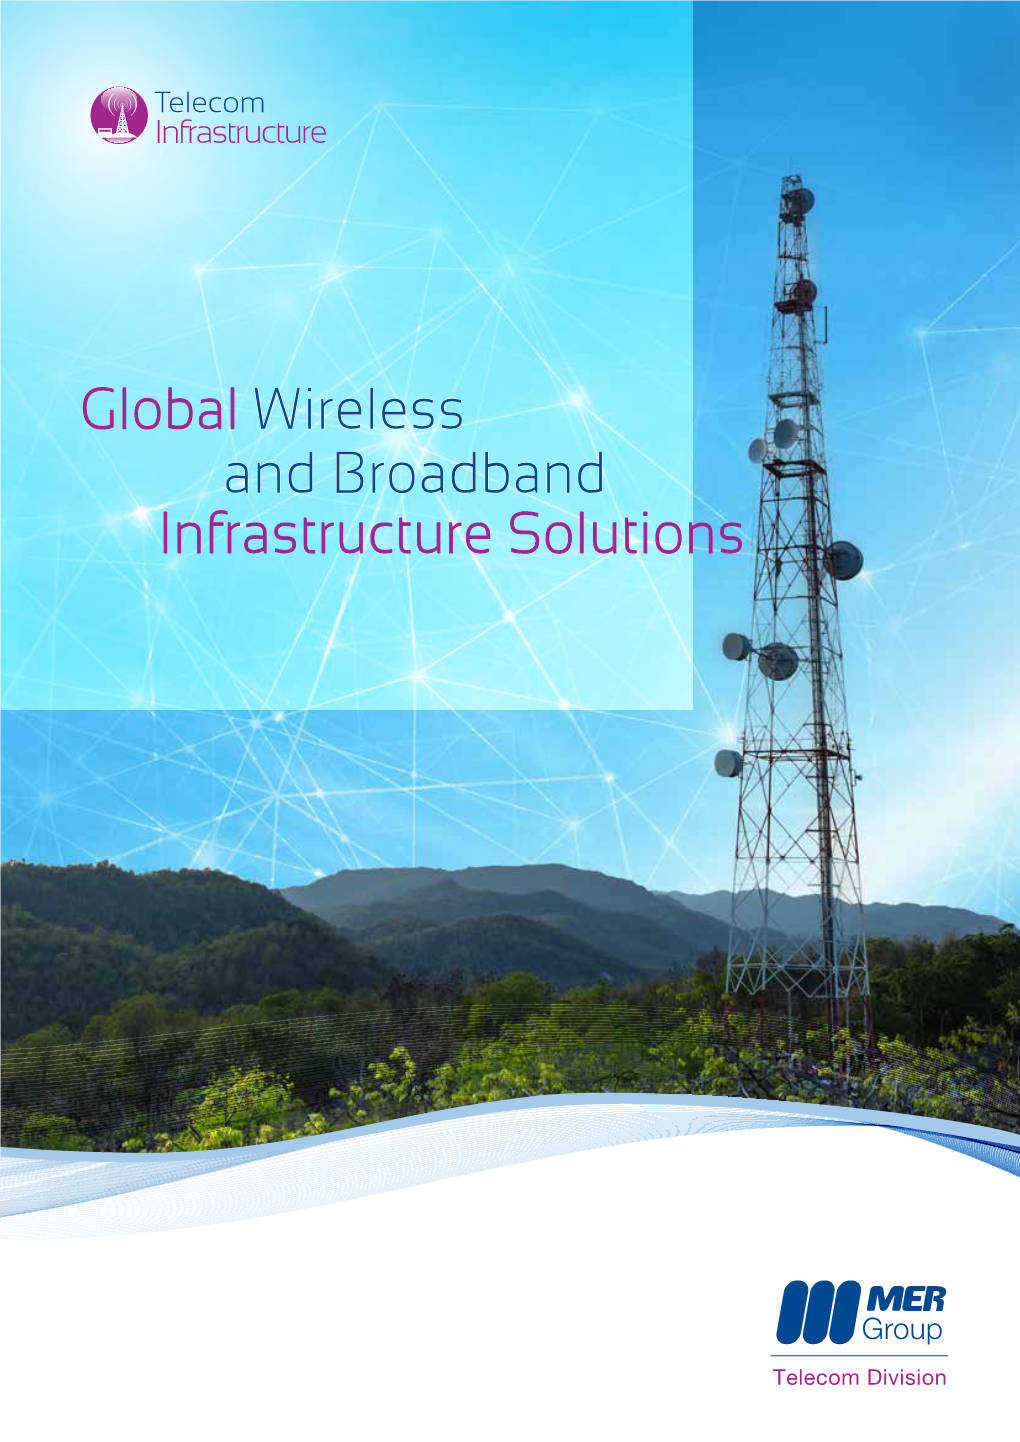 Global Wireless Infrastructure Solutions and Broadband